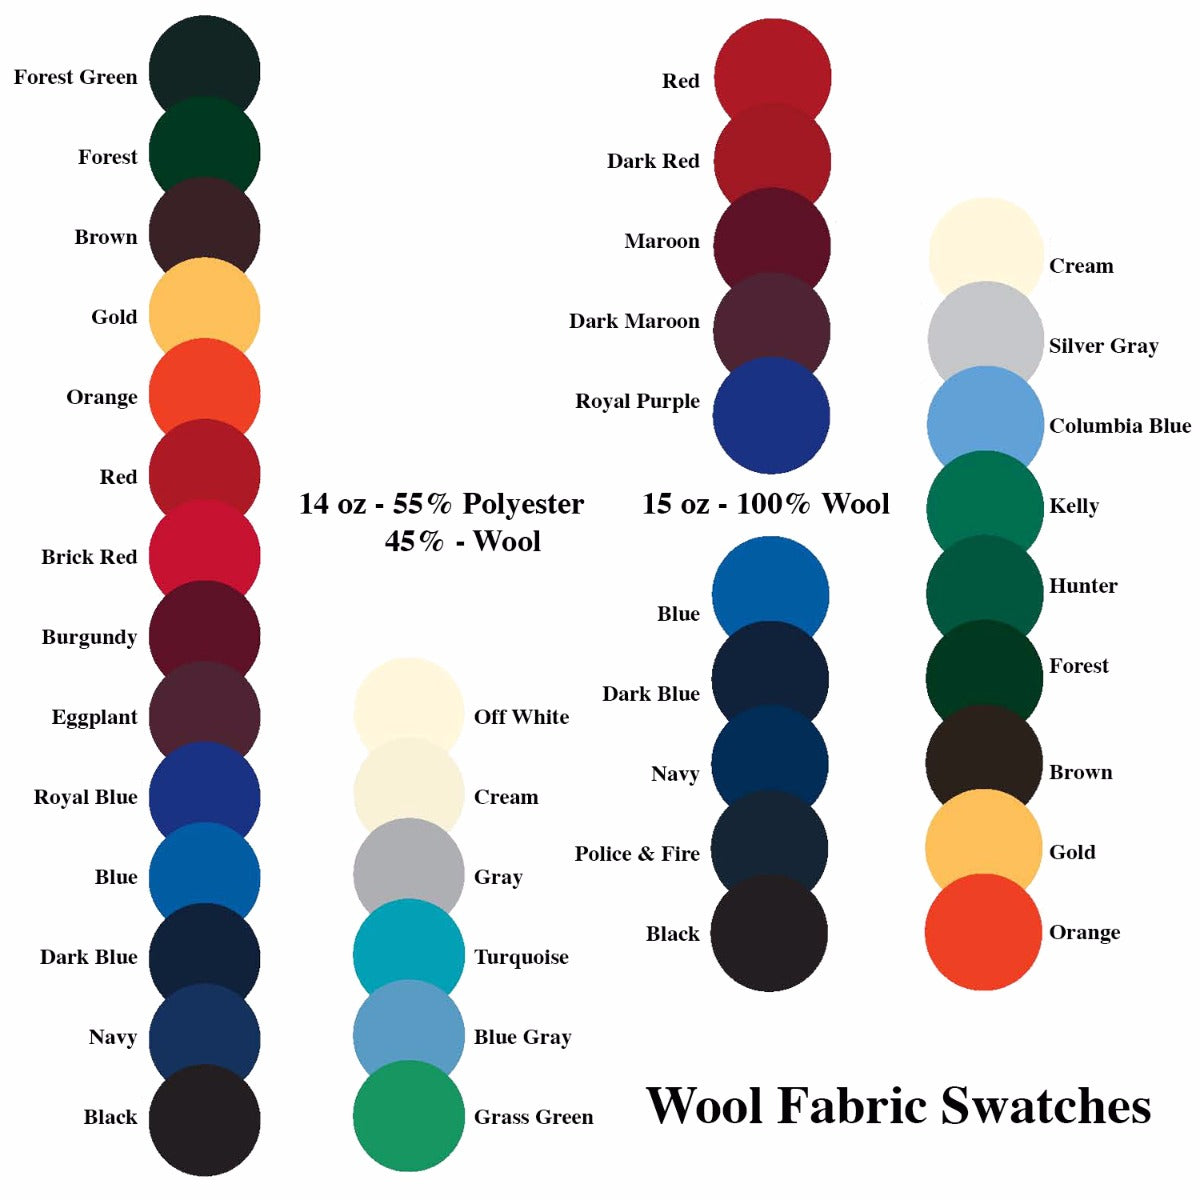 Wool Fabric Swatches